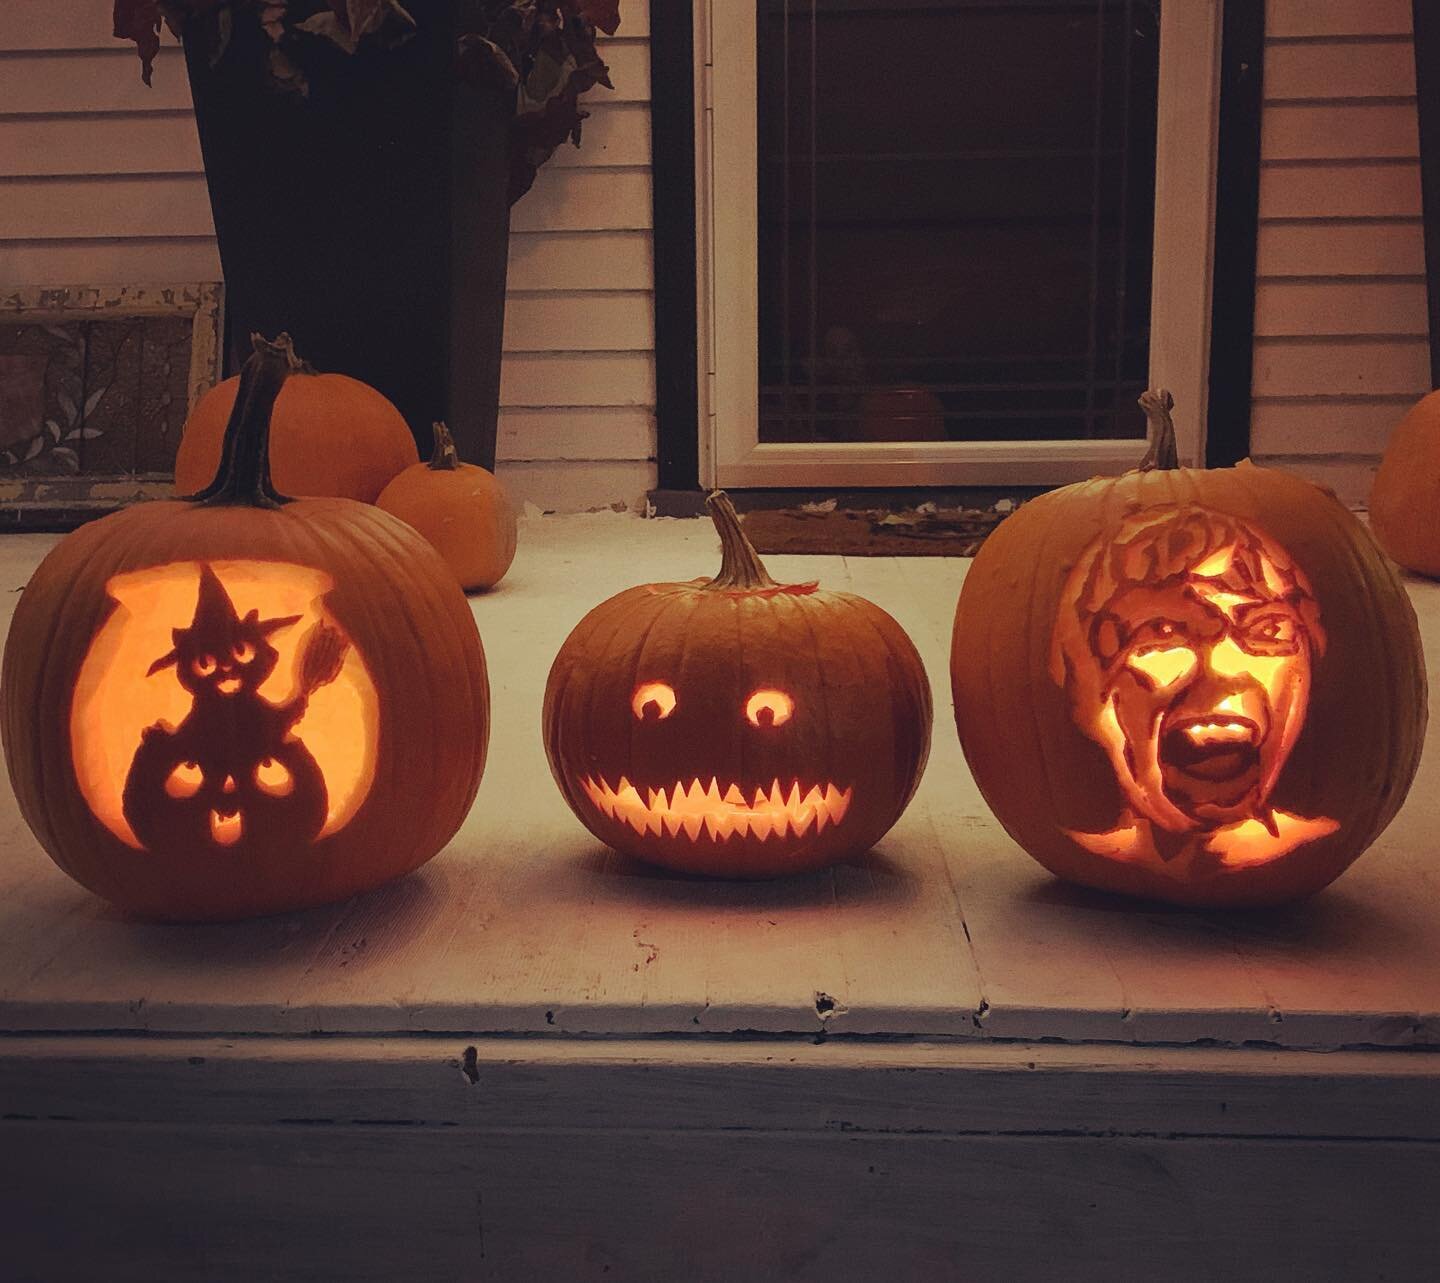 Had the best time carving jack-o-lanterns with @bradydelvecchio and Evan in their gorgeous new home! 🎃 My pumpkin is the one with the cute witchy cat, Brady&rsquo;s is the goofy guy with all the teeth, and Evan&rsquo;s is the impressive screaming fa